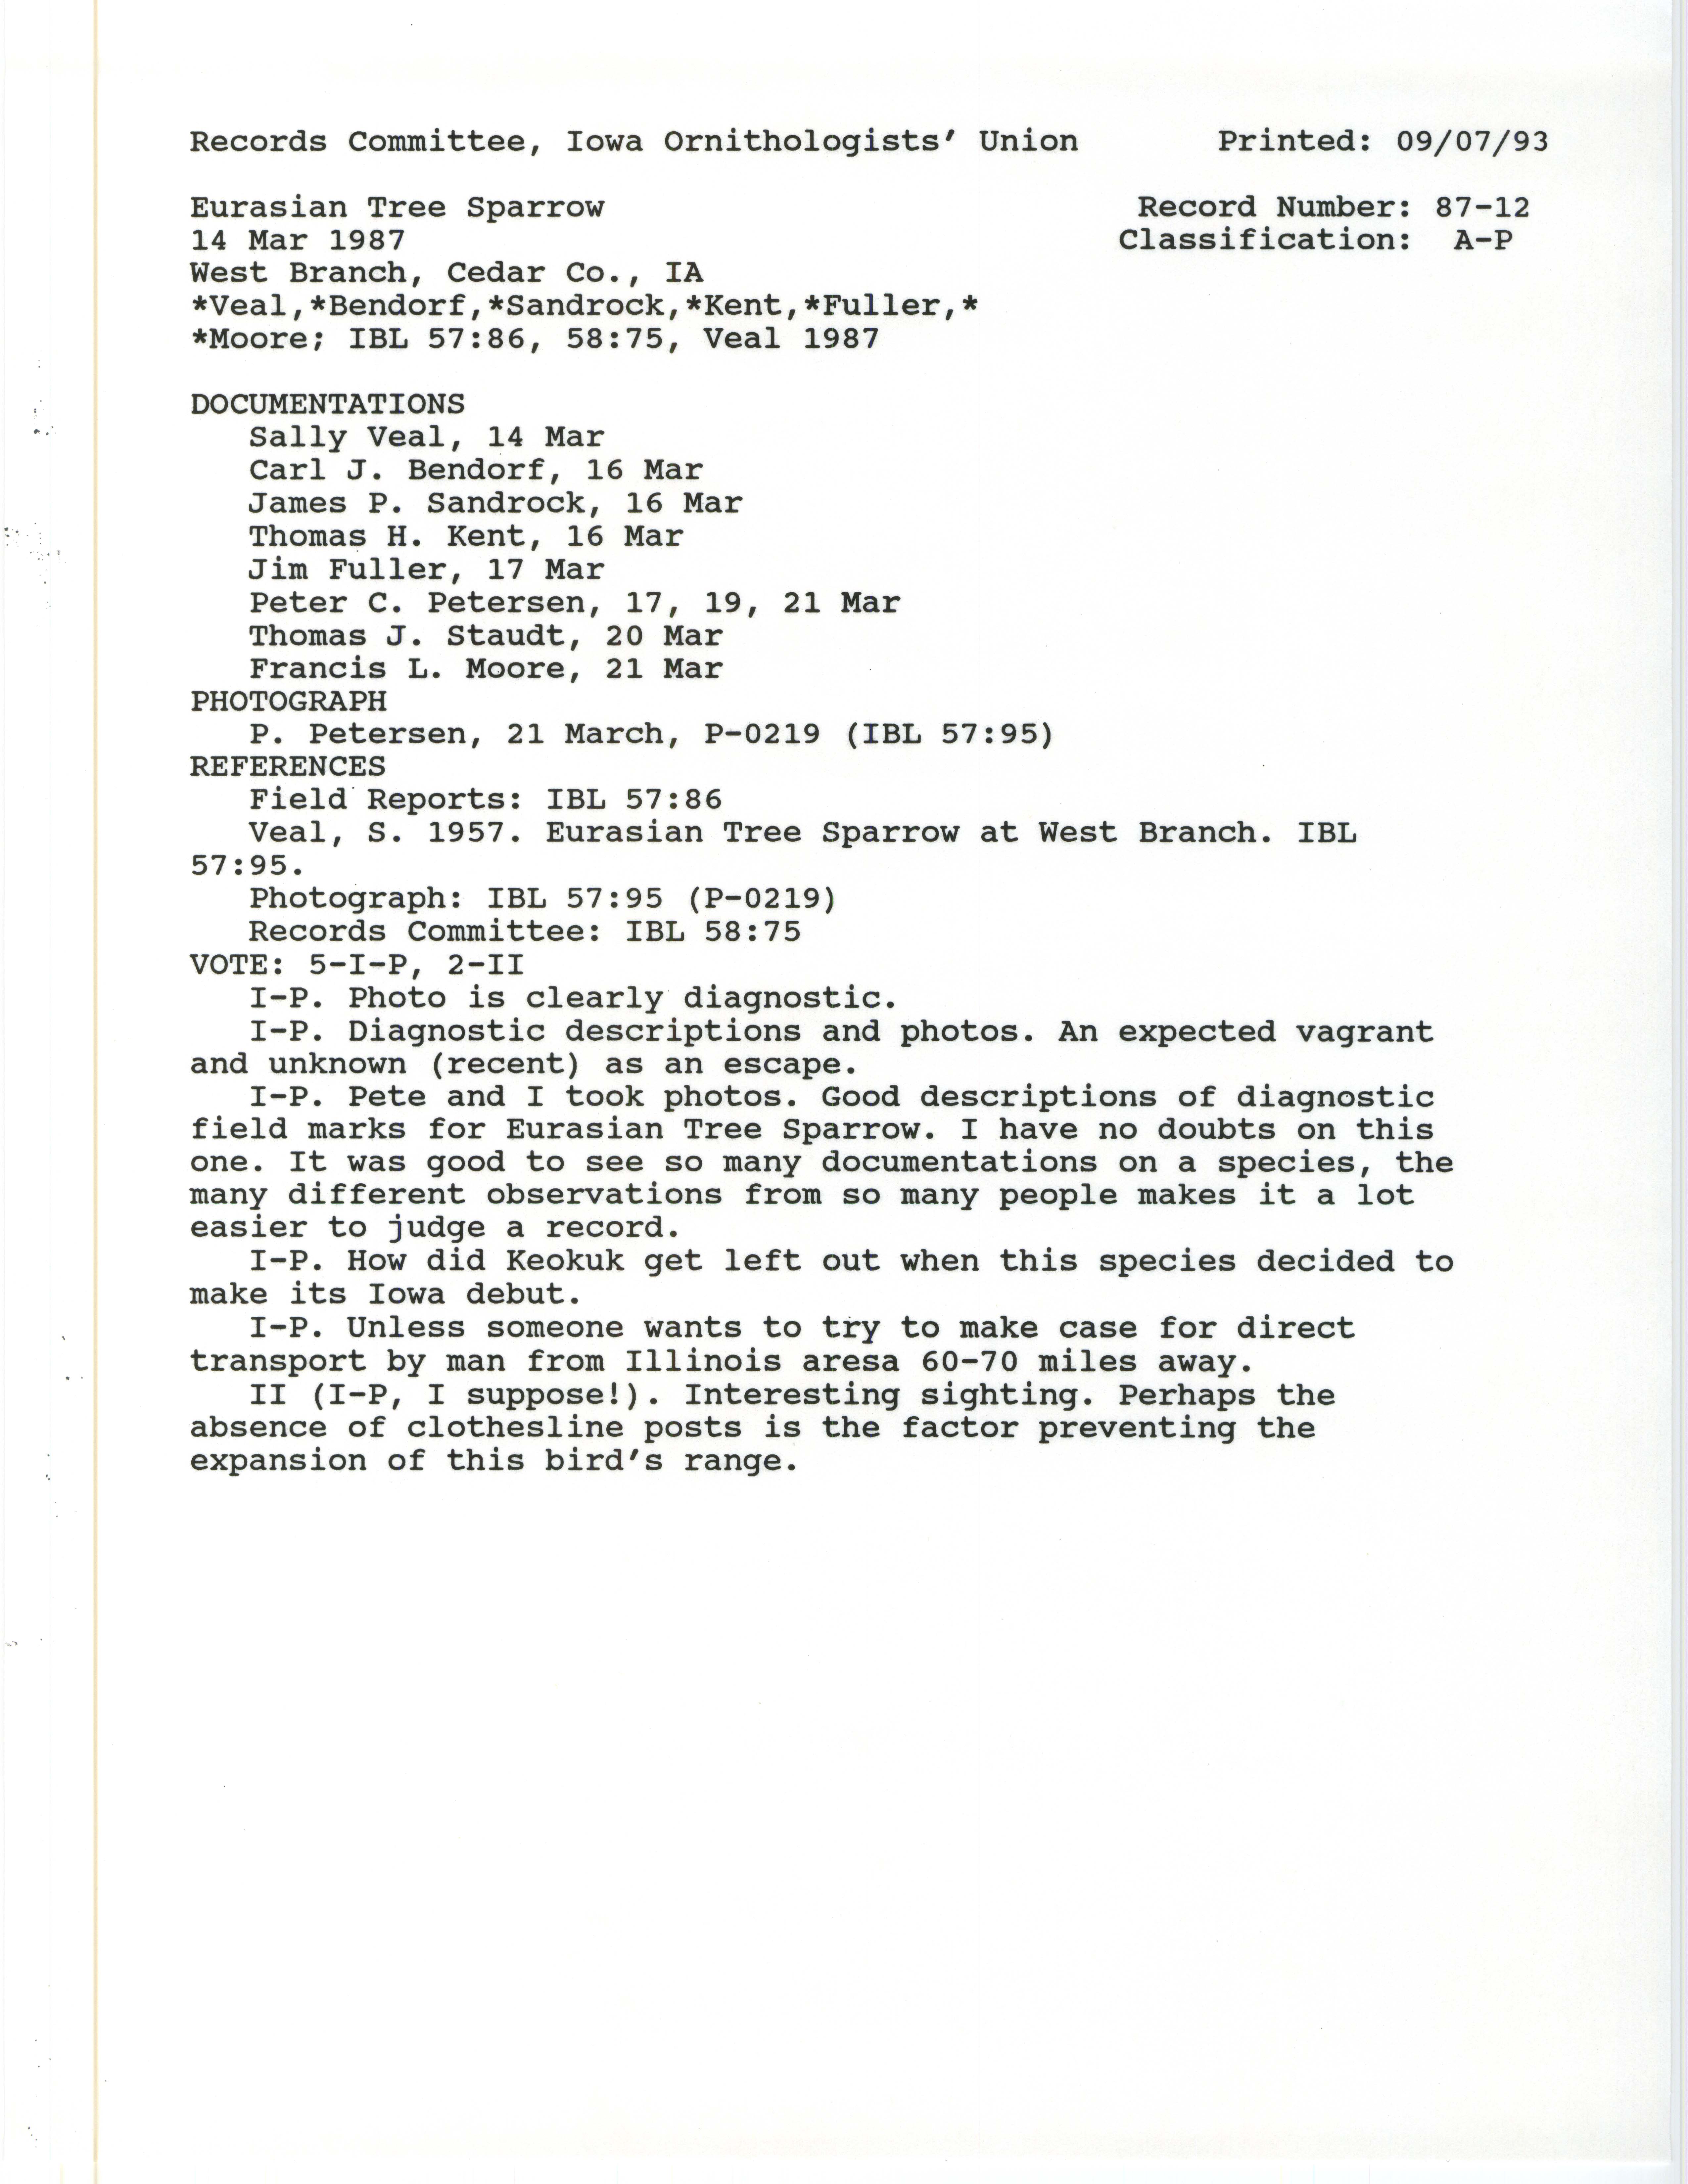 Records Committee review for rare bird sighting for Eurasian Tree Sparrow at West Branch, 1987